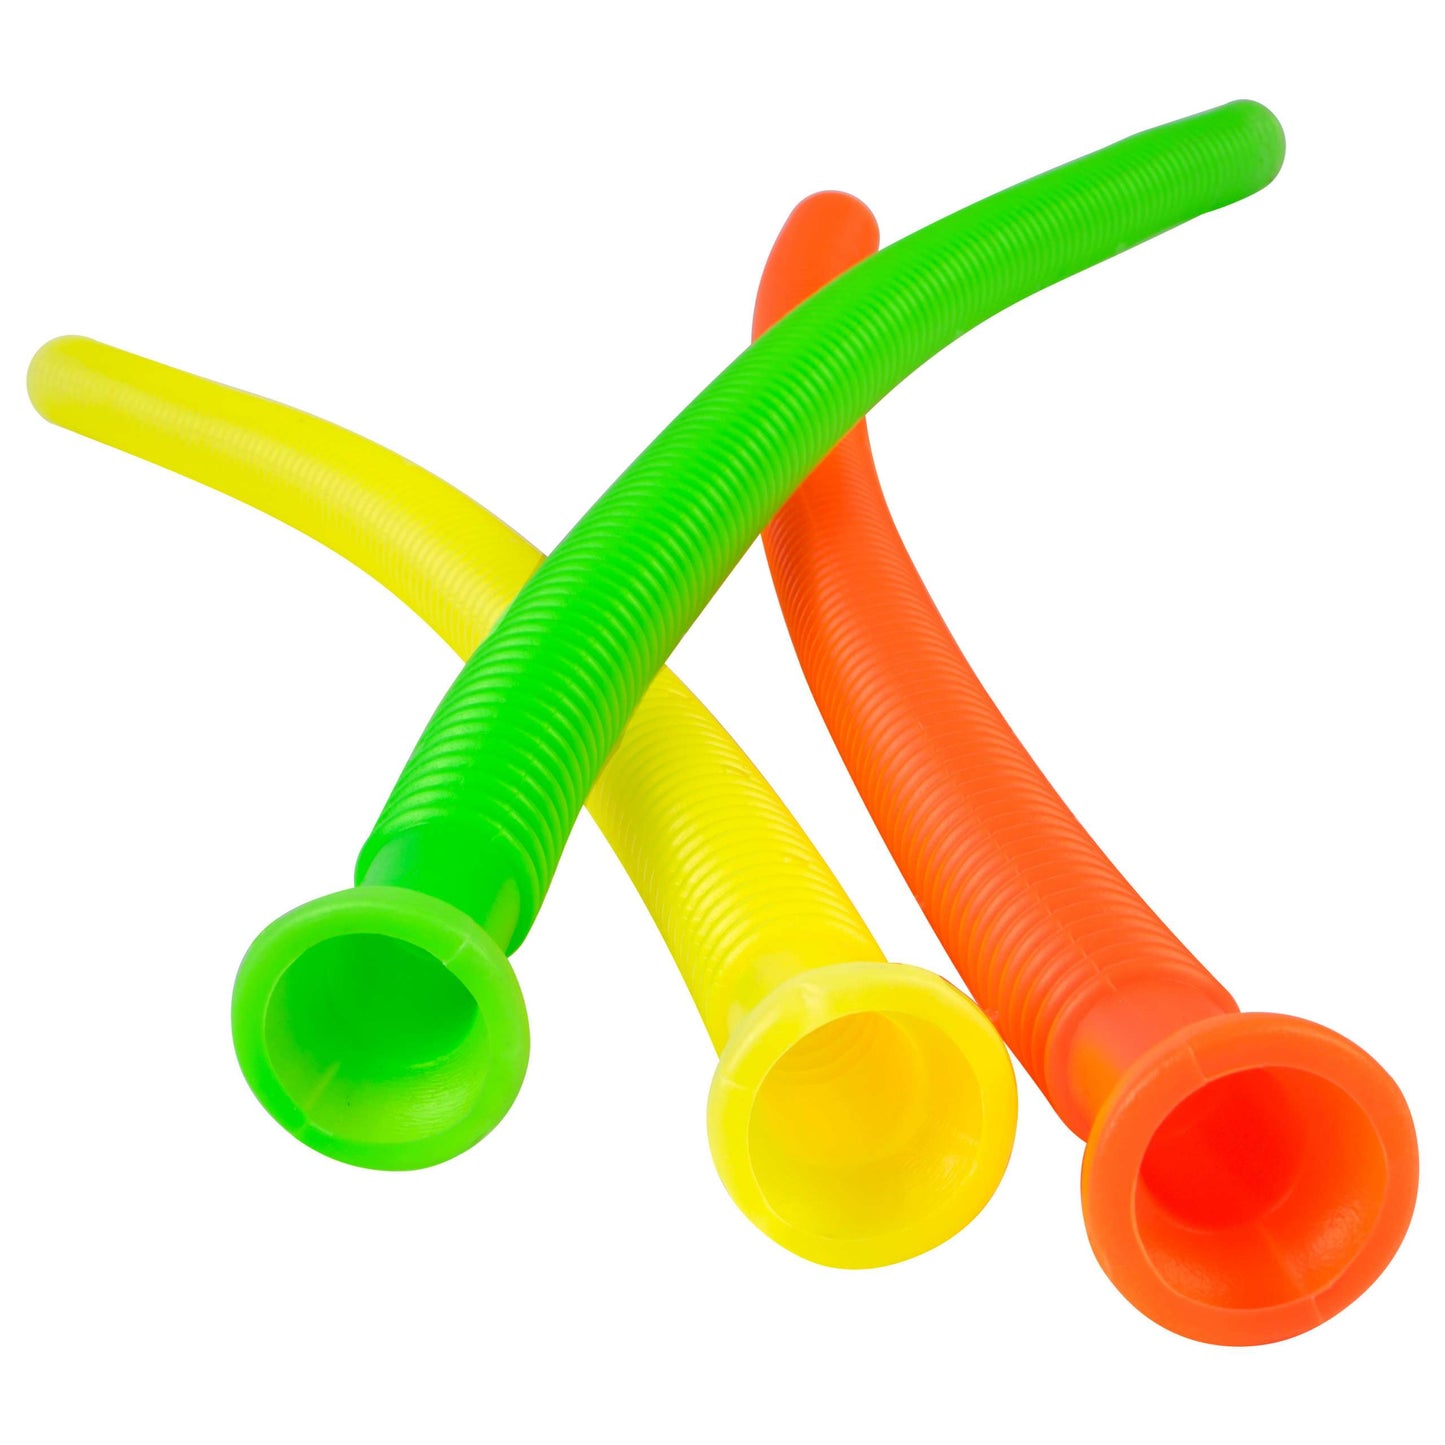 Musical Twirling Tone Pipe Toy Whirling Wailers: Colourful Sound Tubes for Spiraling Fun